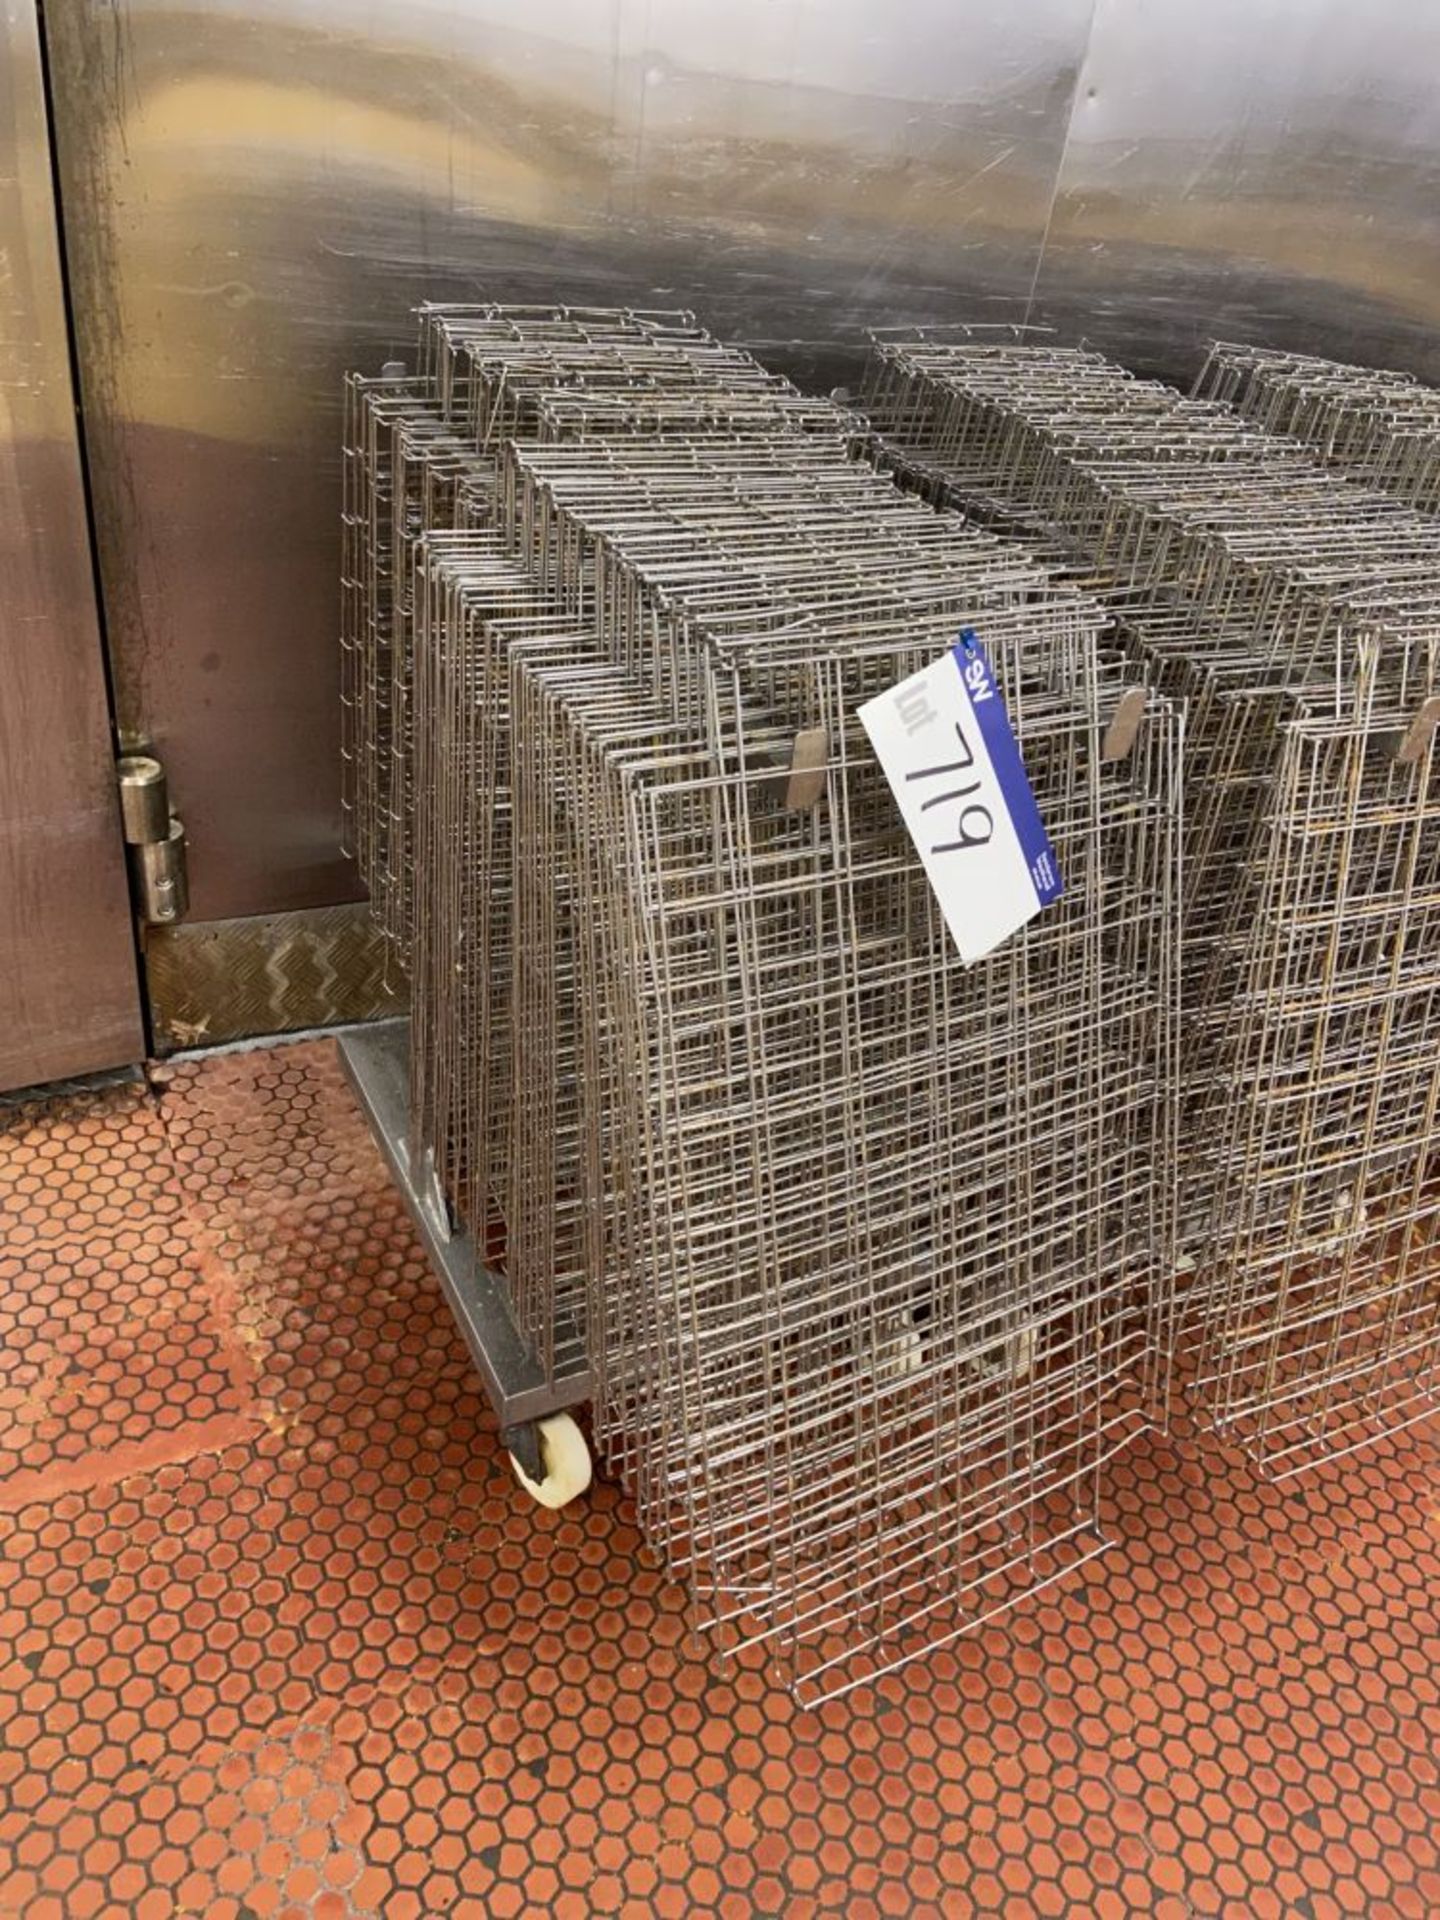 Quantity of Stainless Steel Wire Mesh Baking Trays, with stainless steel trolley, each tray